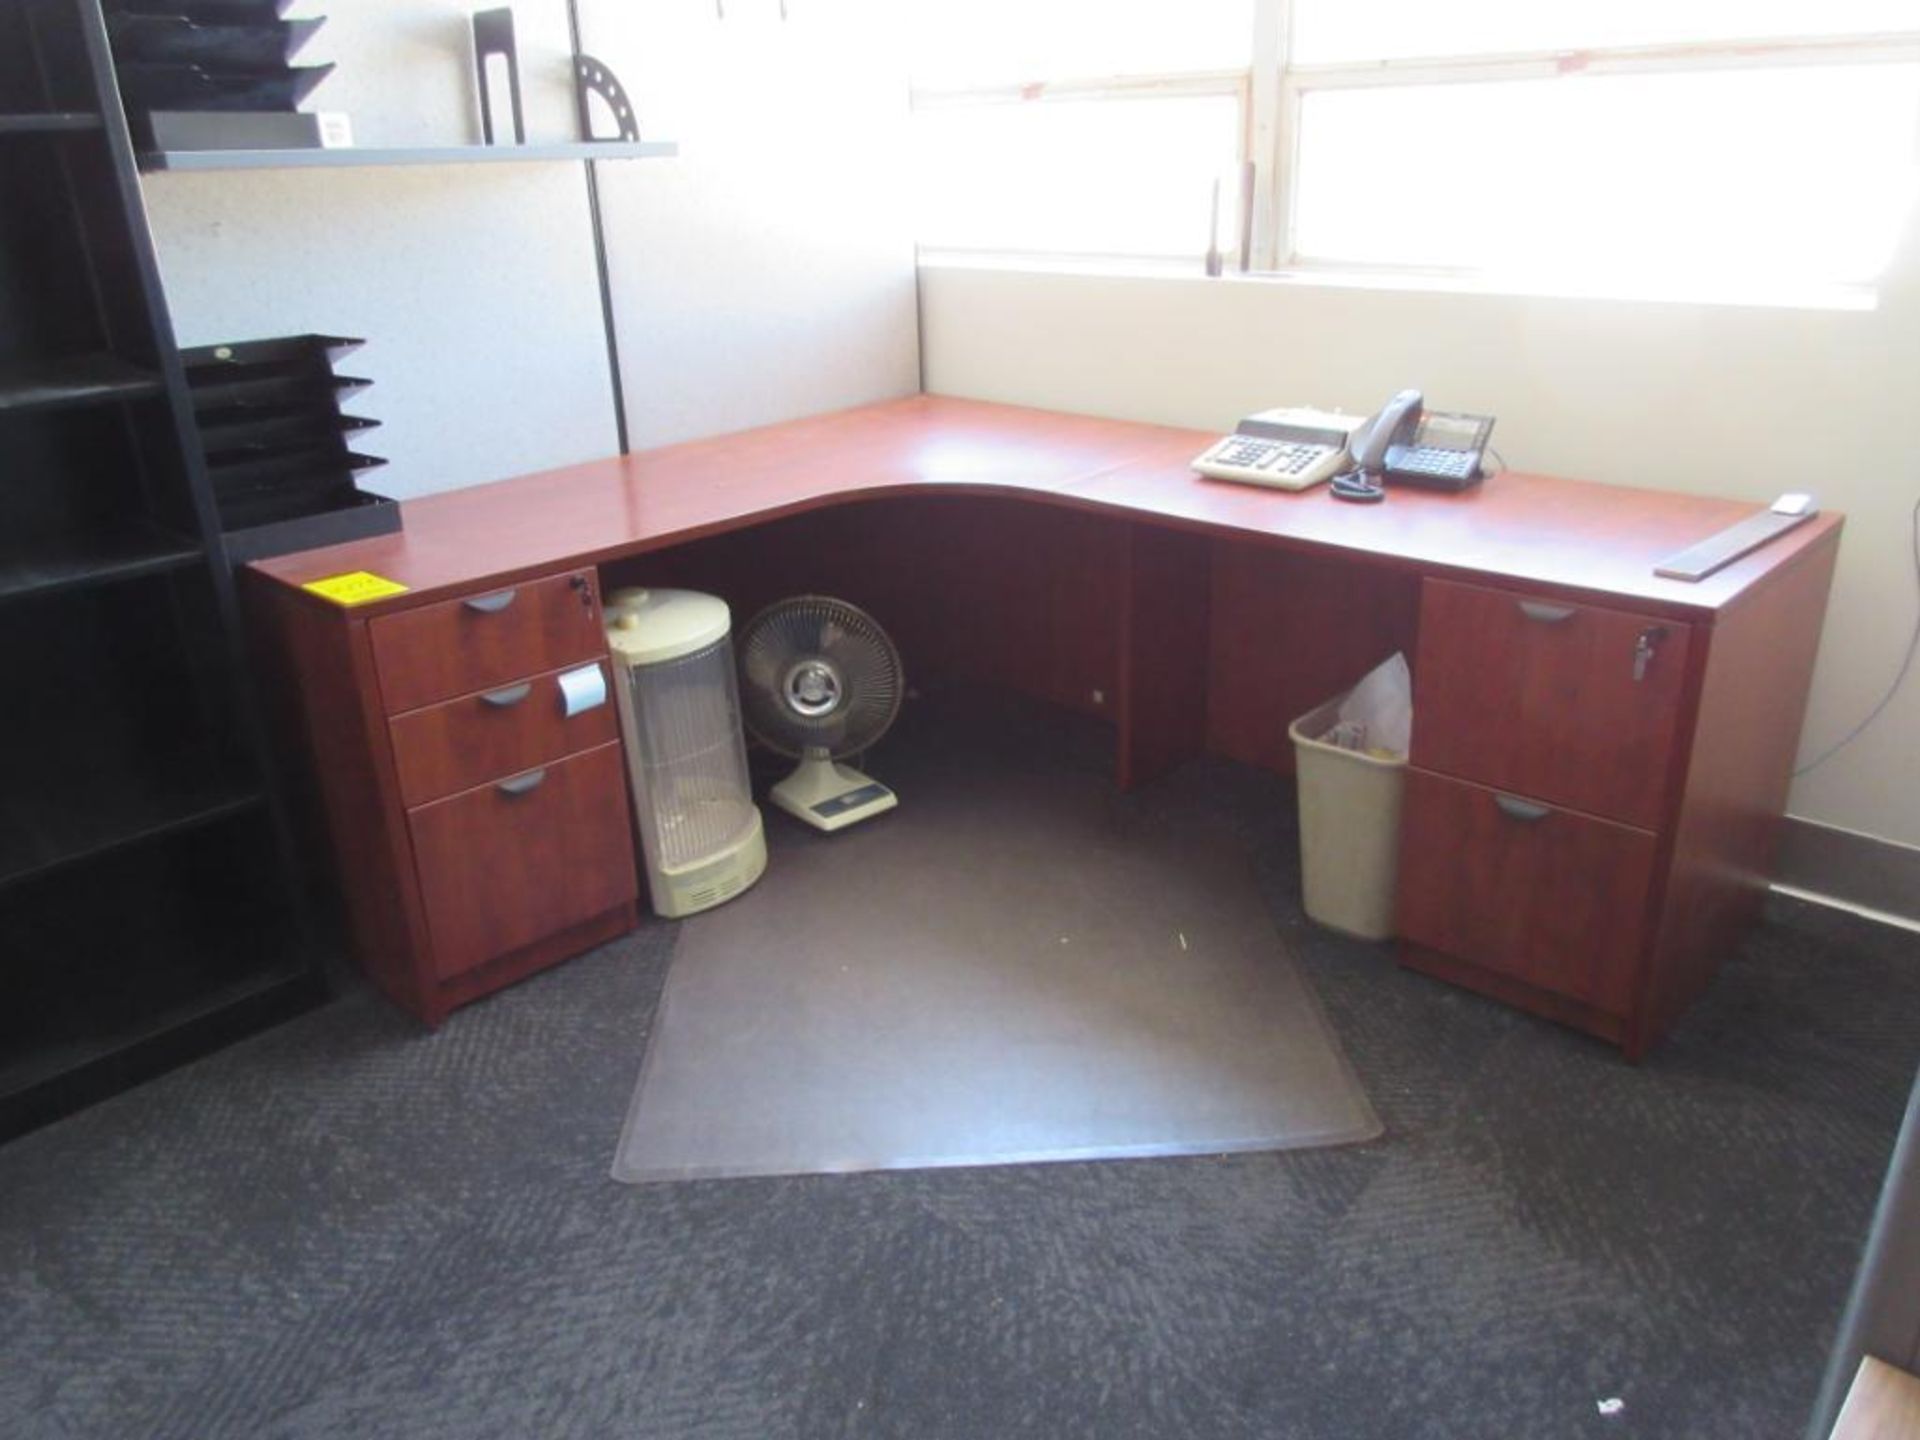 OFFICE AND CONTENTS: DESK CHAIRS FILE CABINETS SHELVING UNIT 2-DOOR CABINET TABLES CUBICLE PANELS - Image 9 of 17